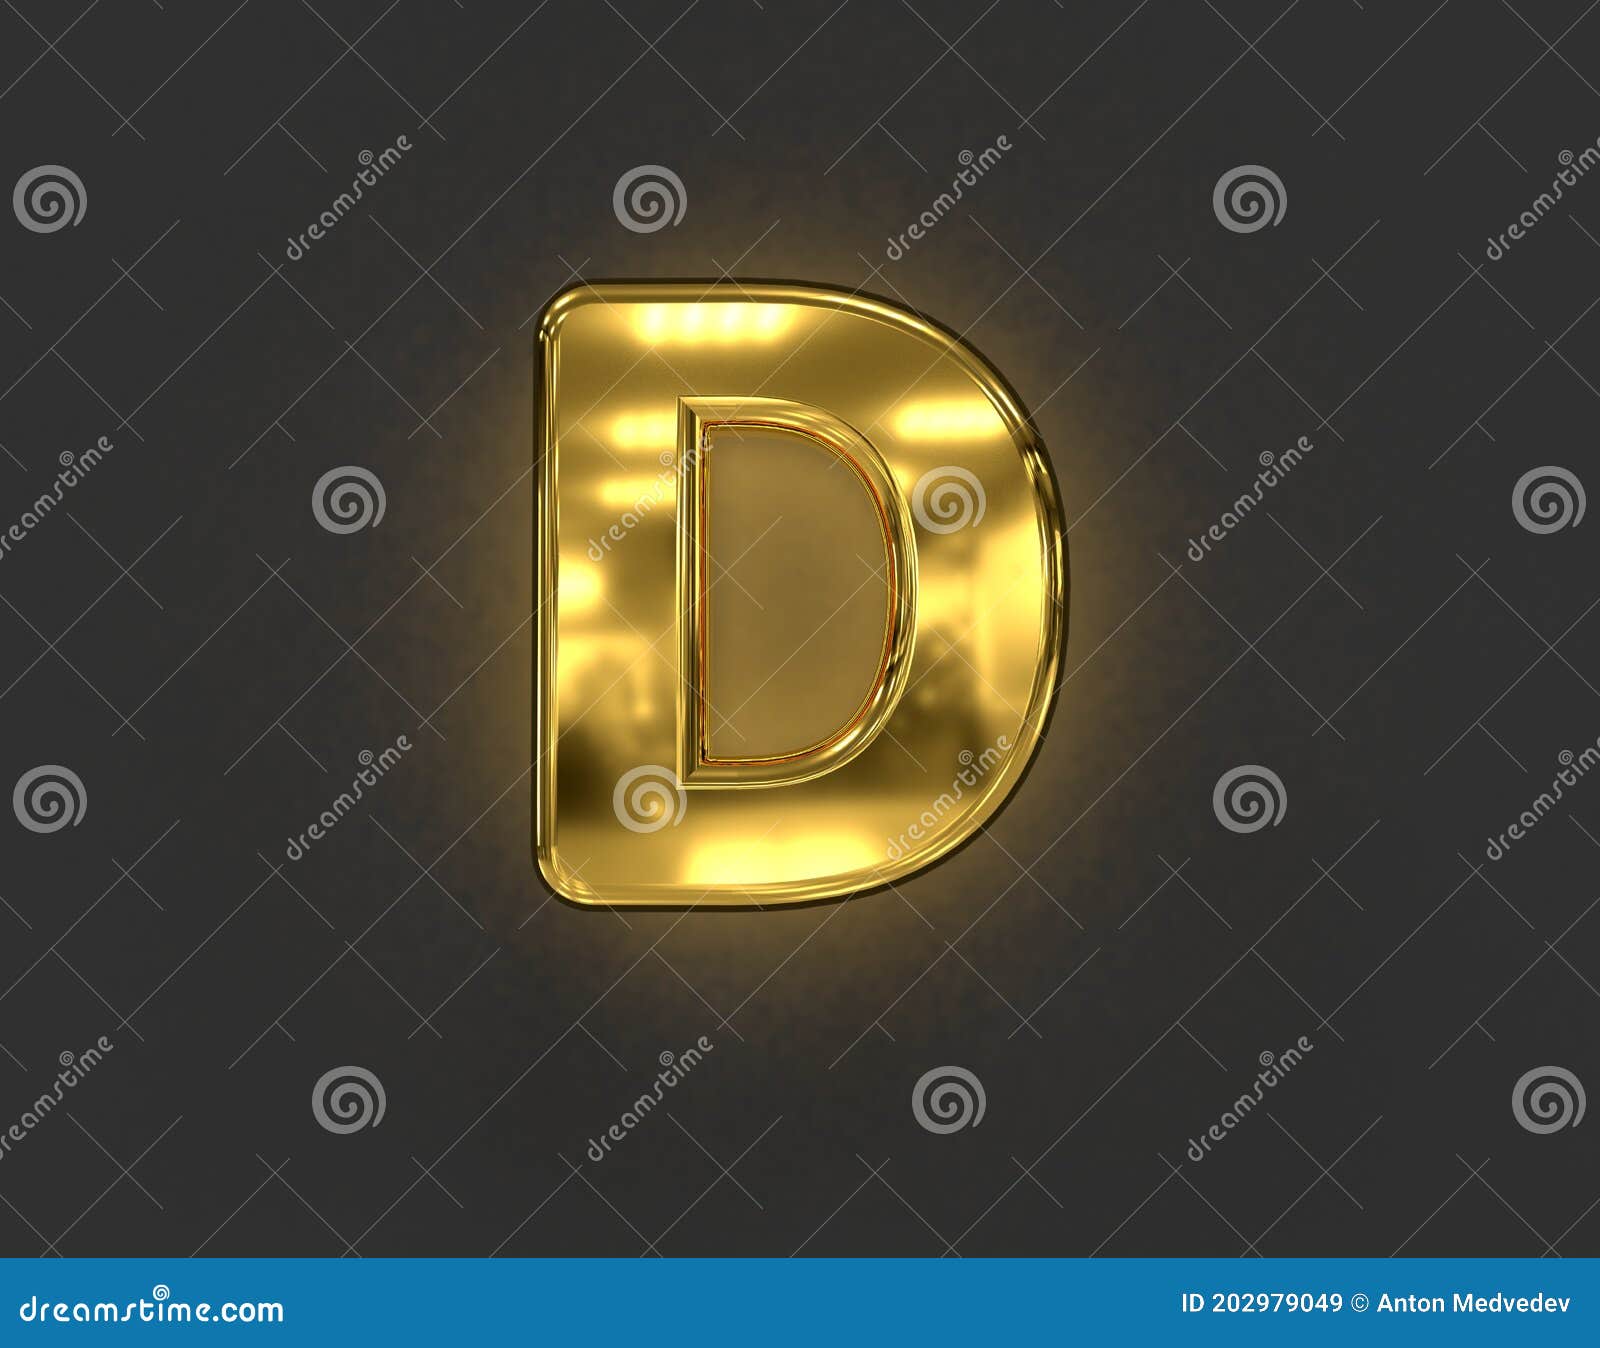 Glossy Golden Metal Font - Letter D Isolated on Dark Grey Background ...